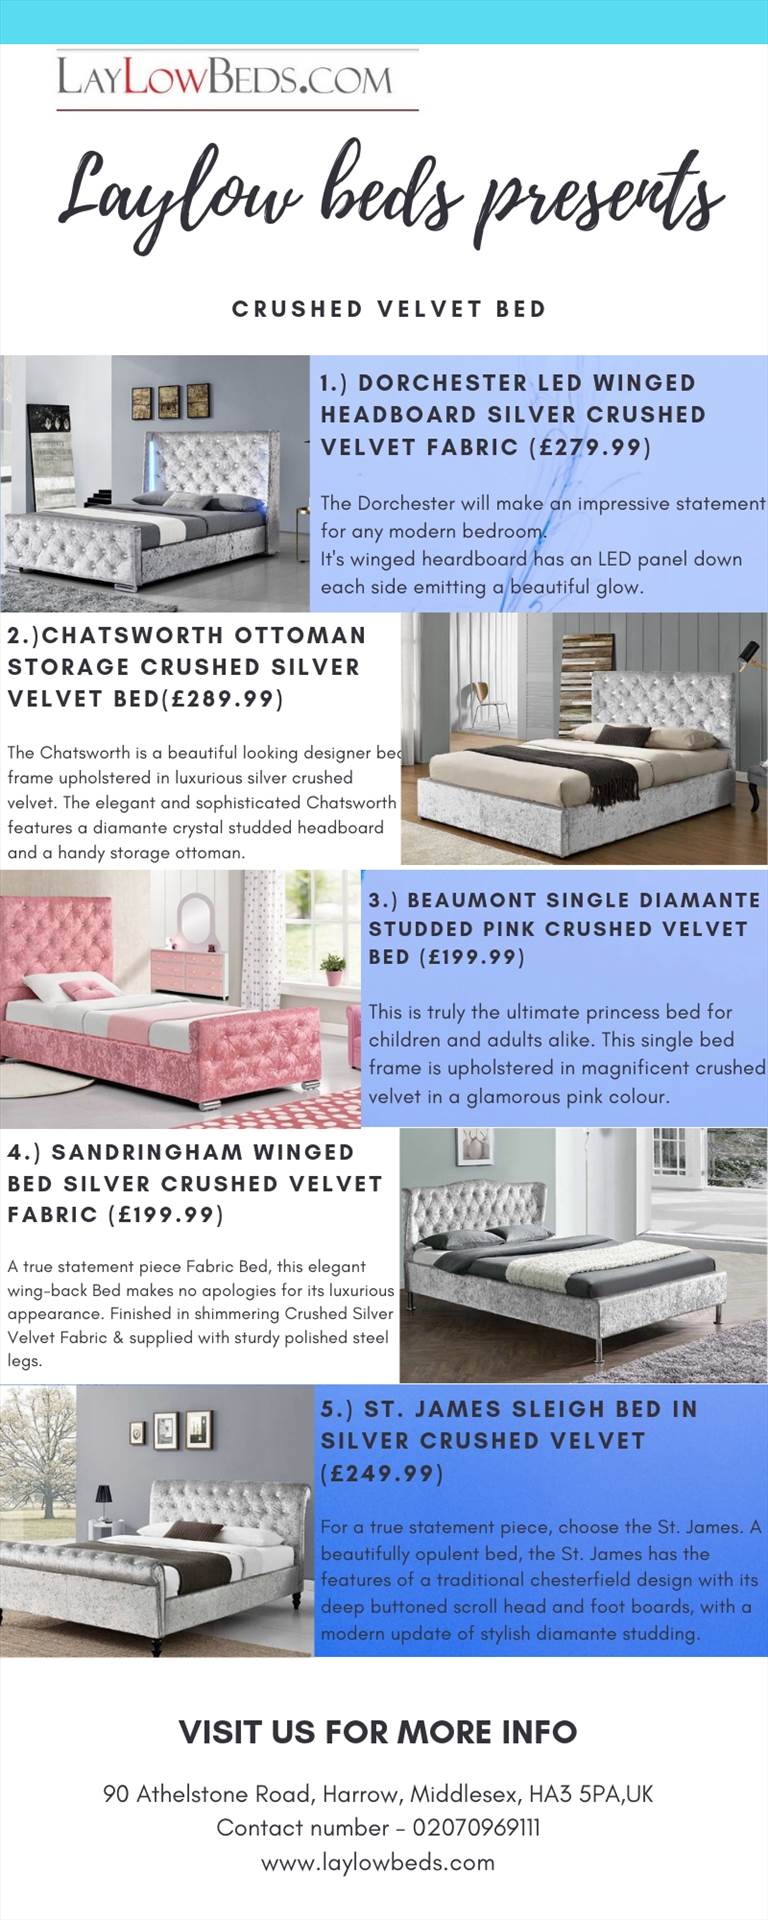 Crushed Velvet Bed UK Info.jpg  by Laylow Beds